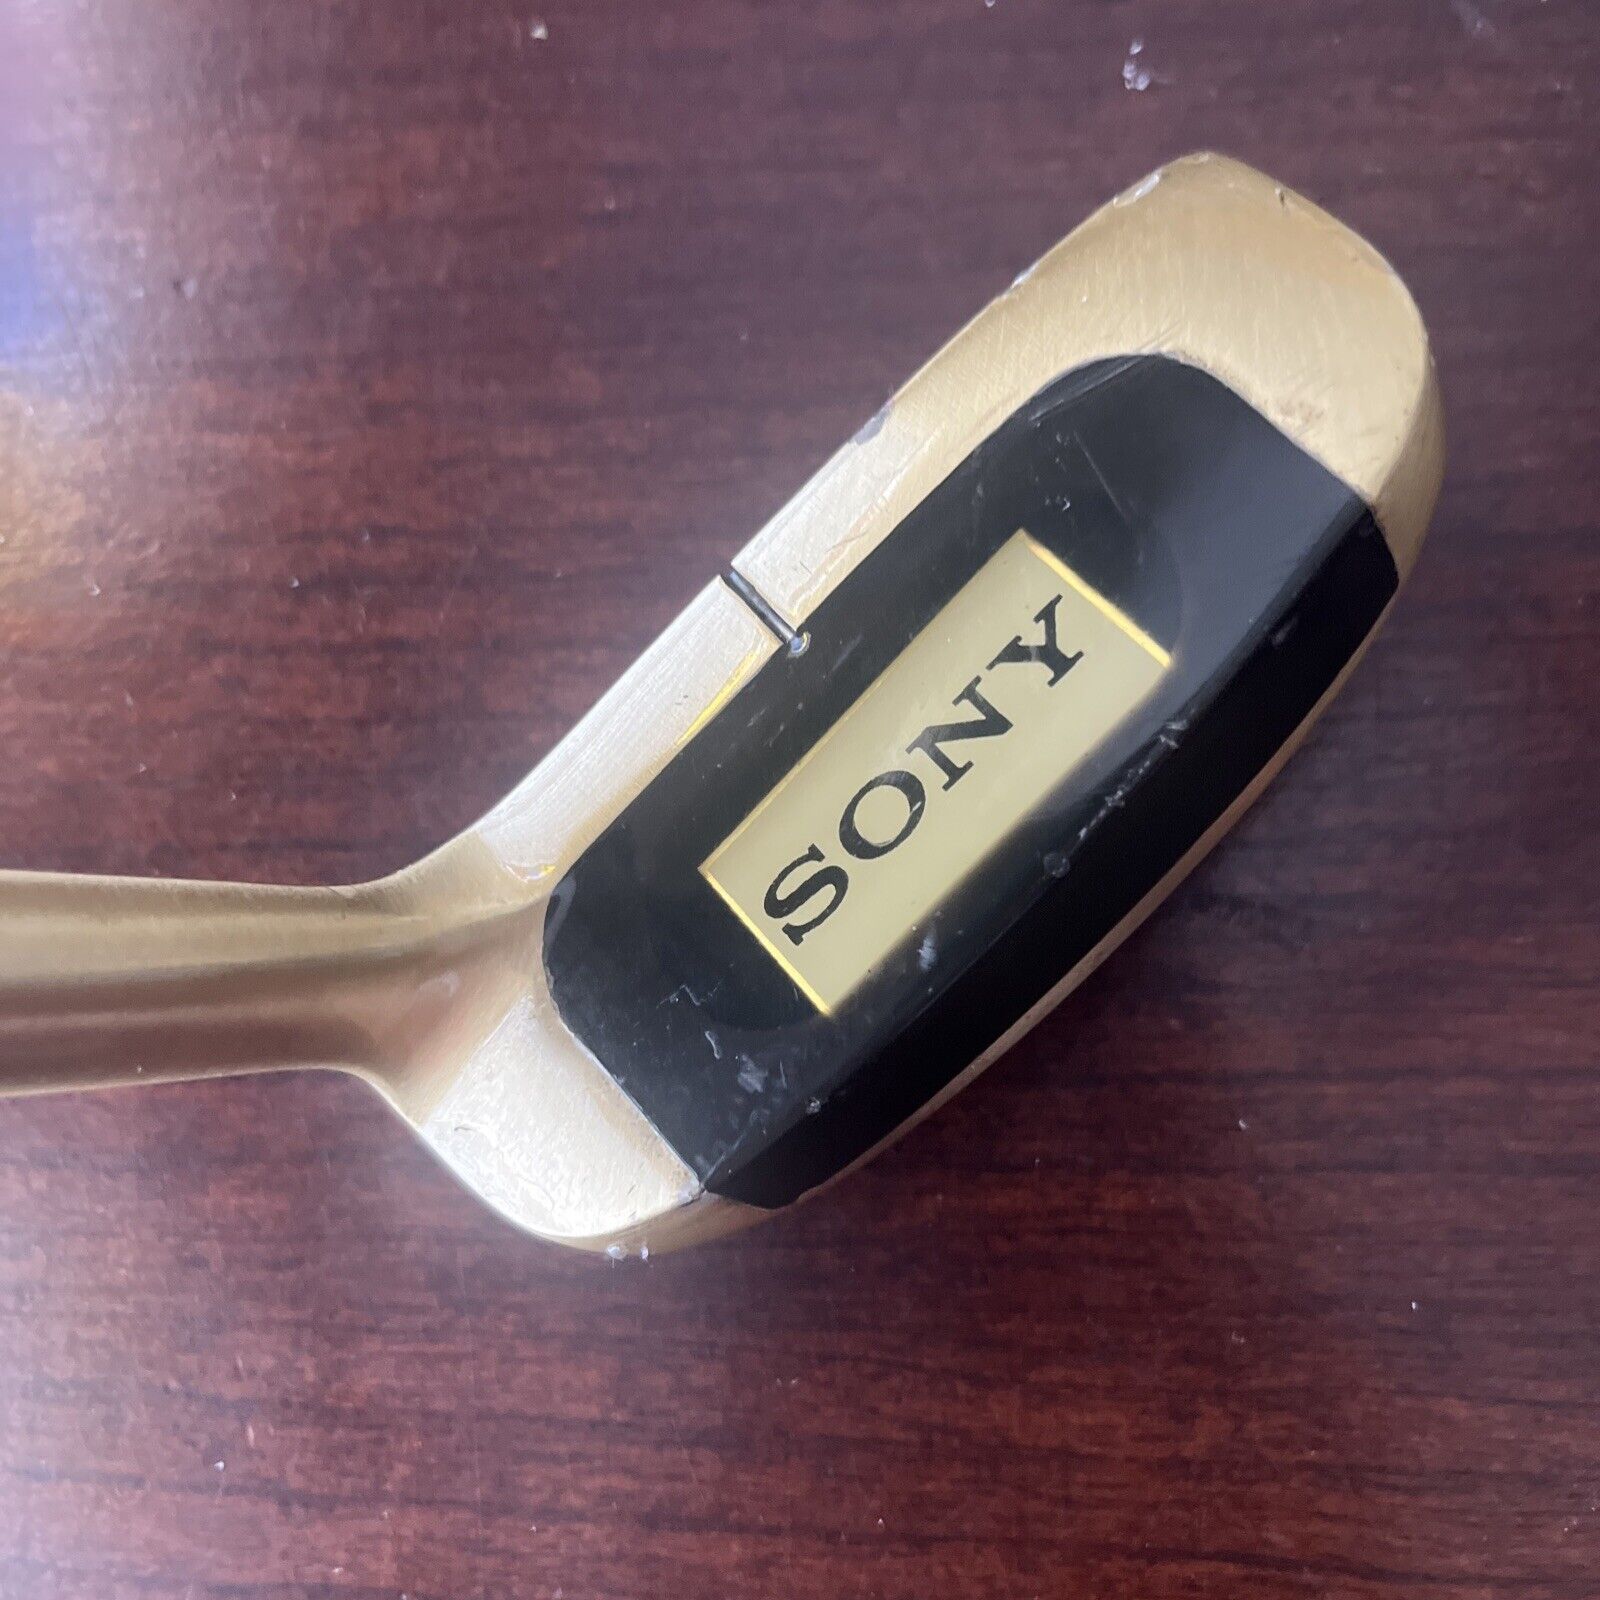 Vintage-Sony Golf -Blade putter- Gold. Very rare